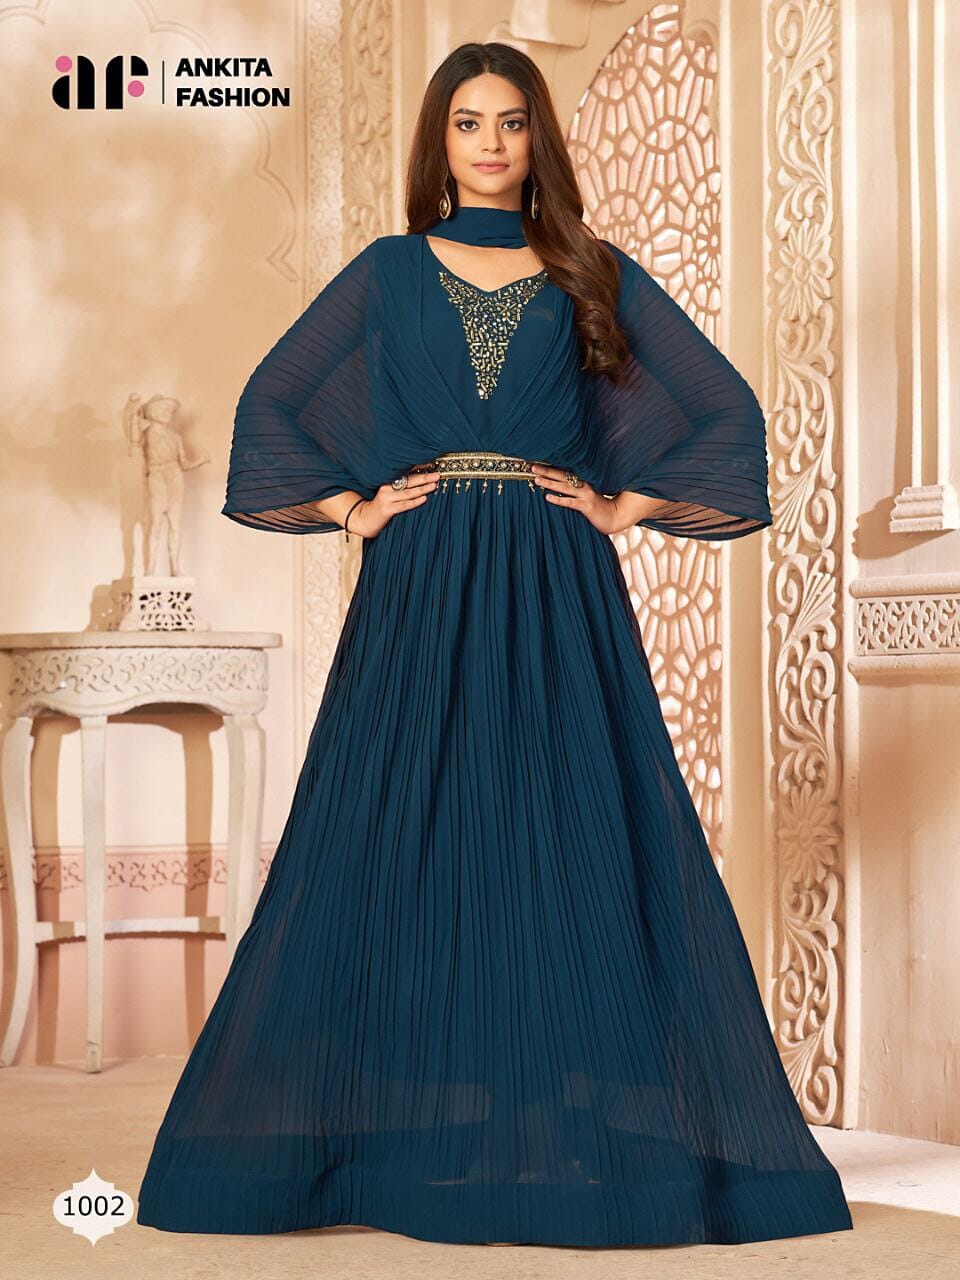 1002 Teal Pure Georgette with Neck Swarovski work Long Gown gown shopindi.sg 